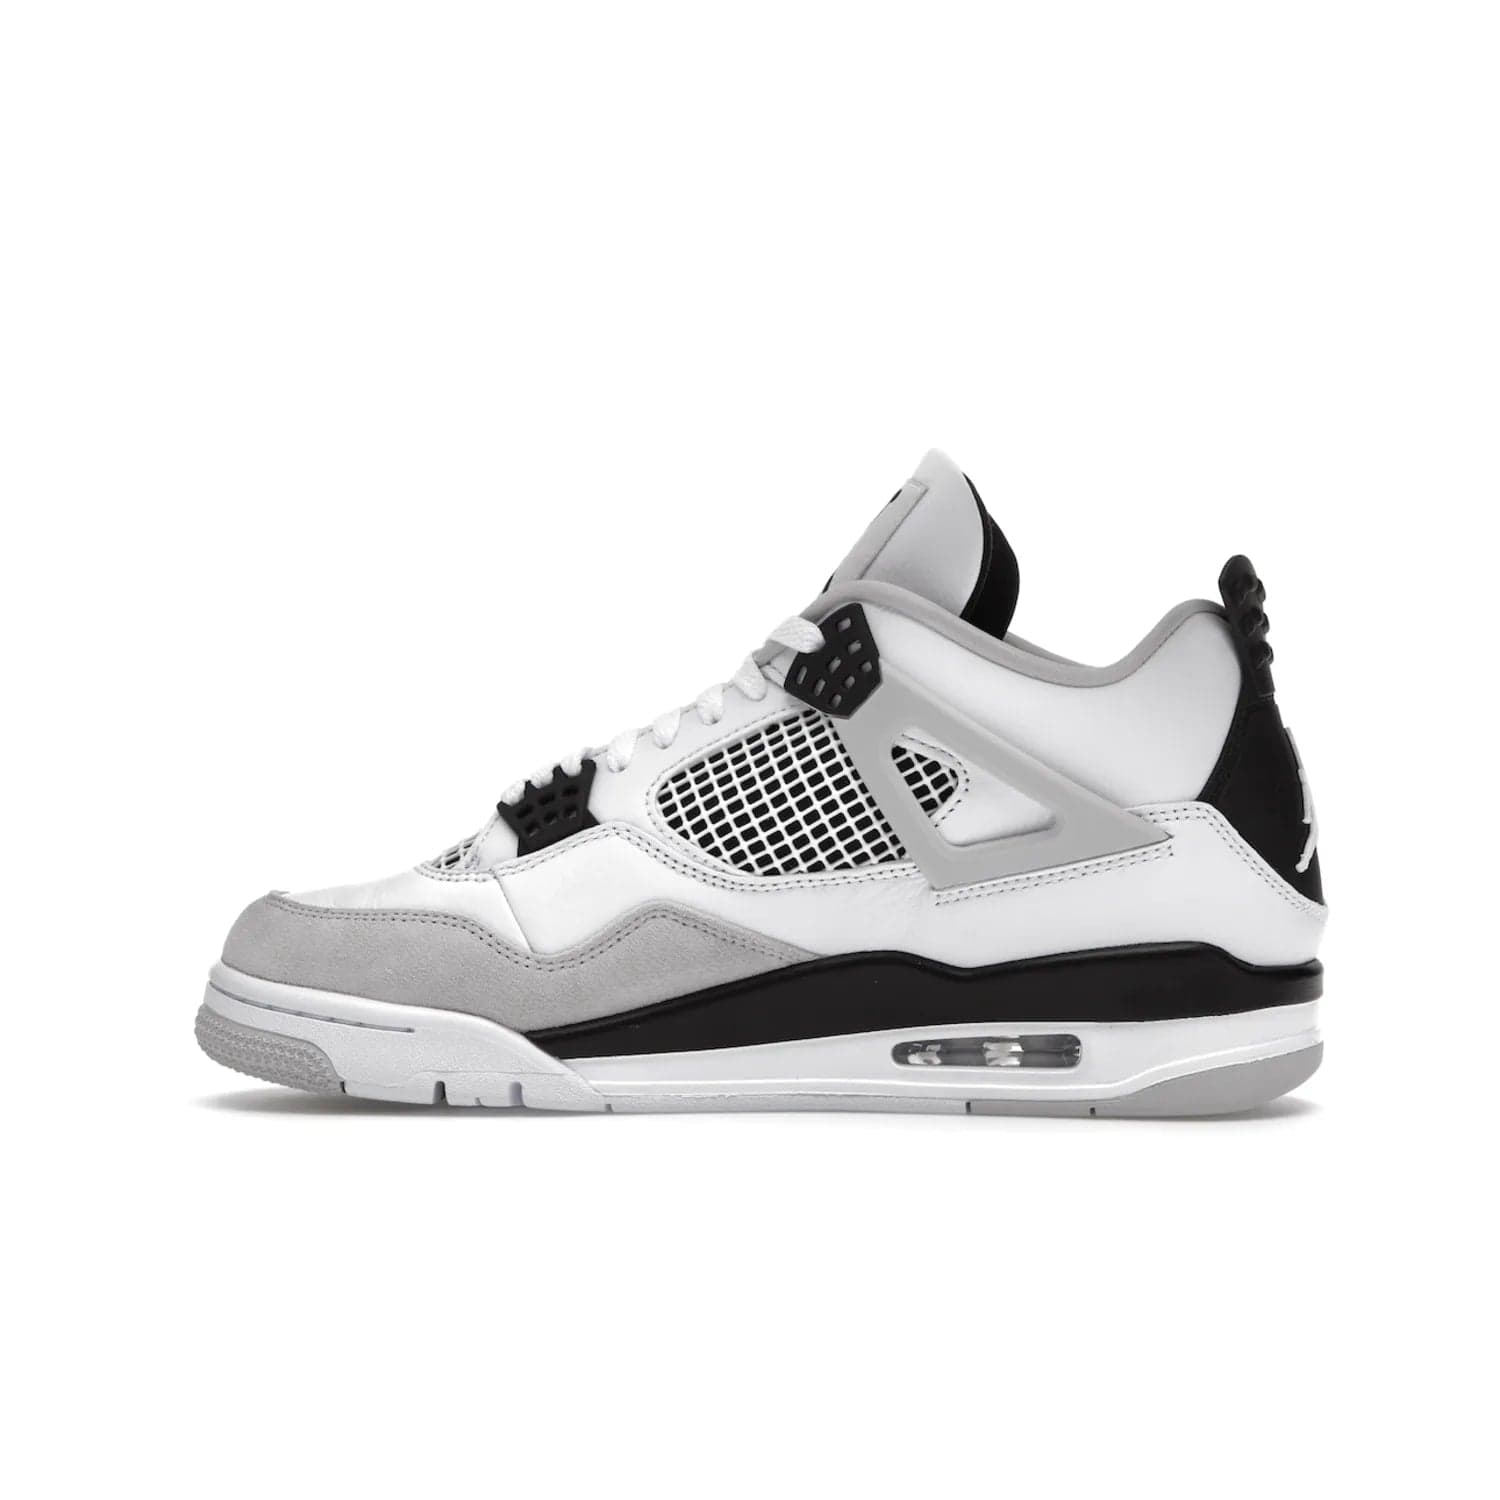 Jordan 4 Retro Military Black - Image 20 - Only at www.BallersClubKickz.com - Updated Air Jordan 4 style with a white/black/light grey sole and visible Air unit. Released in May 2022, offering timeless classic style and comfort.